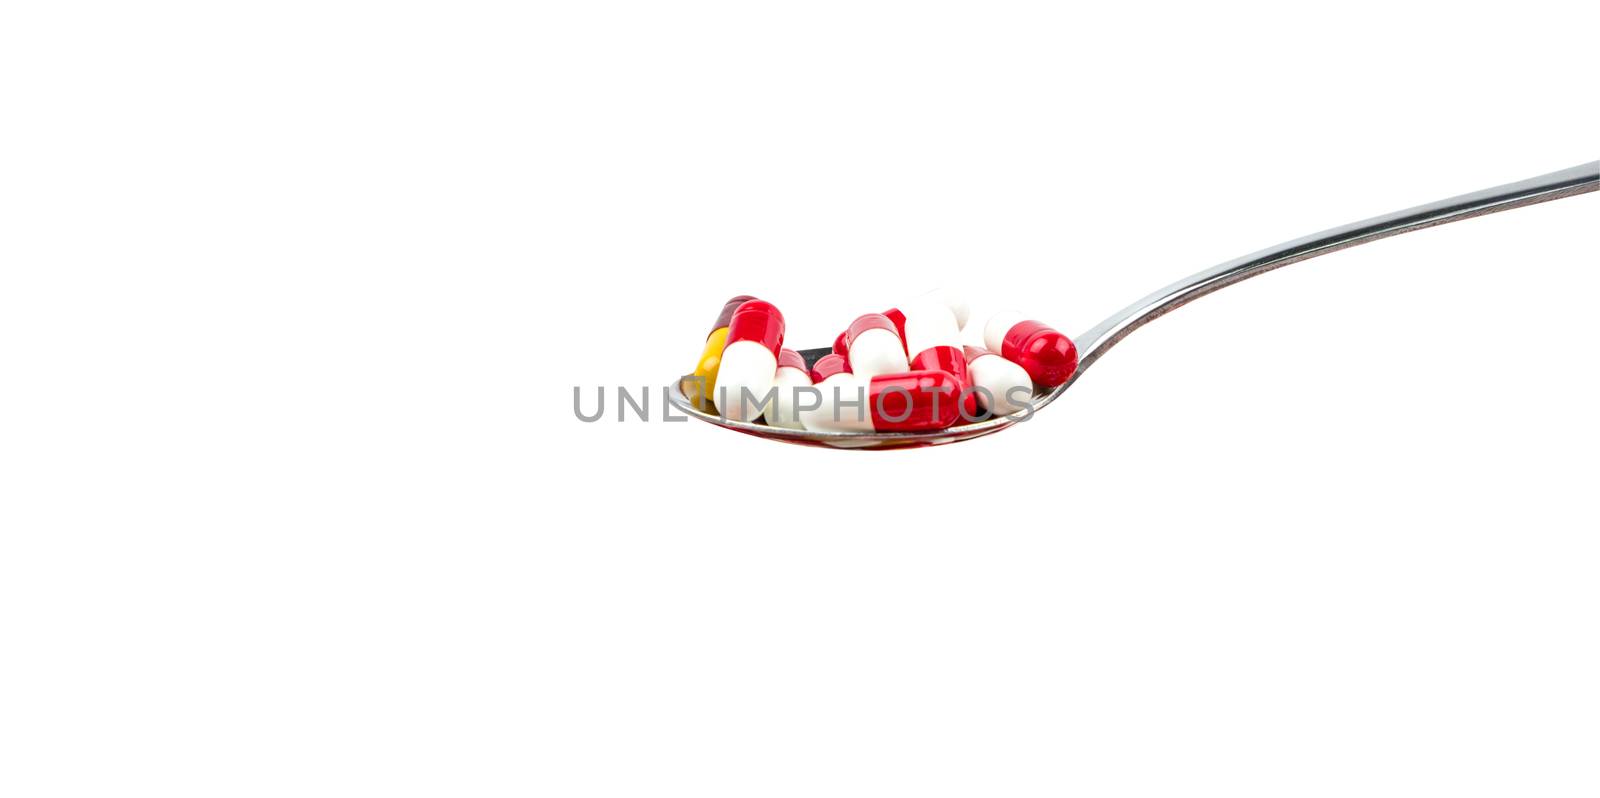 Antibiotic capsule pills in stainless steel spoon isolated on background with copy space. Drug resistance concept. Antibiotics drug use with reasonable and global healthcare concept. by Fahroni